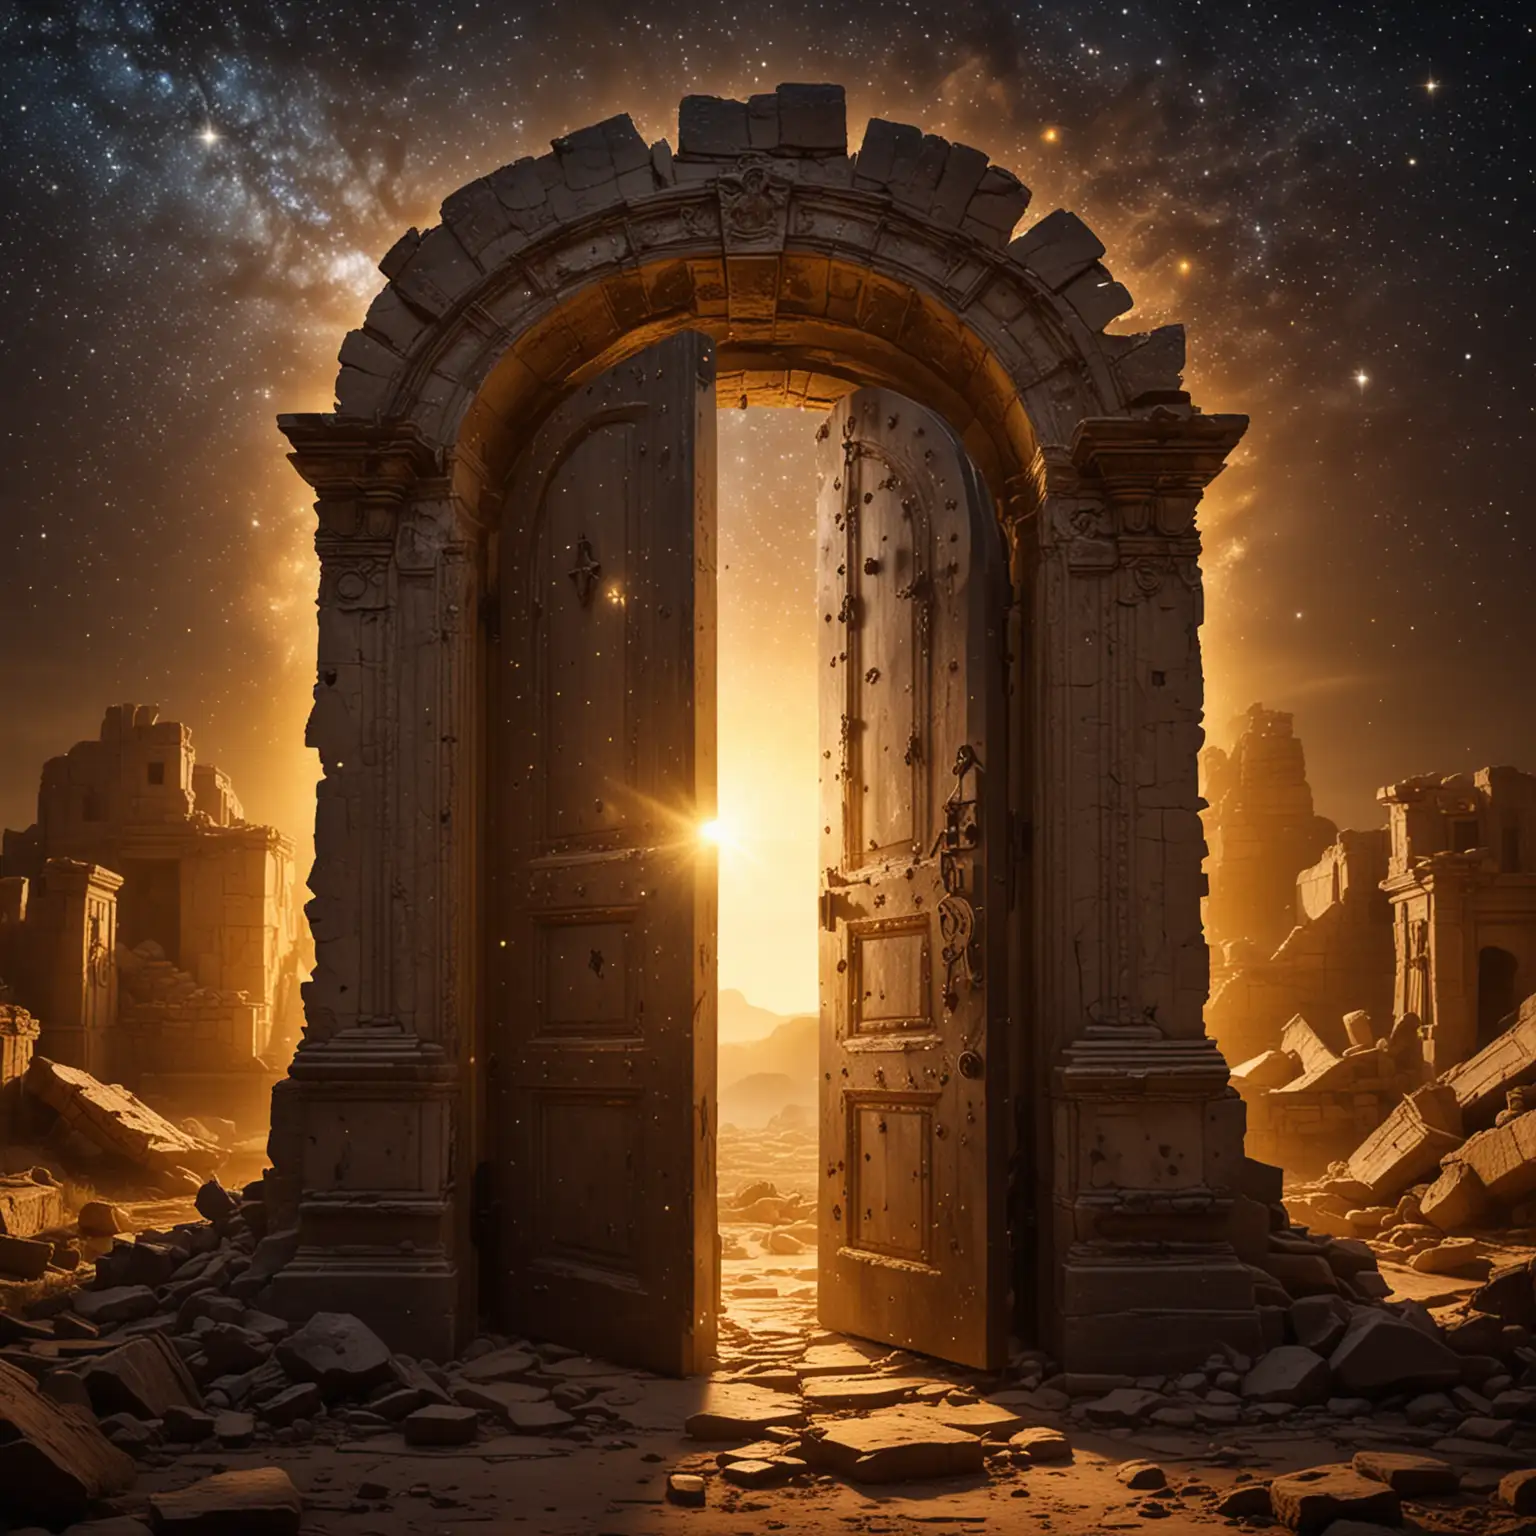 In the dark, star-filled sky, an ancient door stands open amidst a lot of ruins. A very strong bright golden light emanates from the doorway, casting its radiance far and wide.